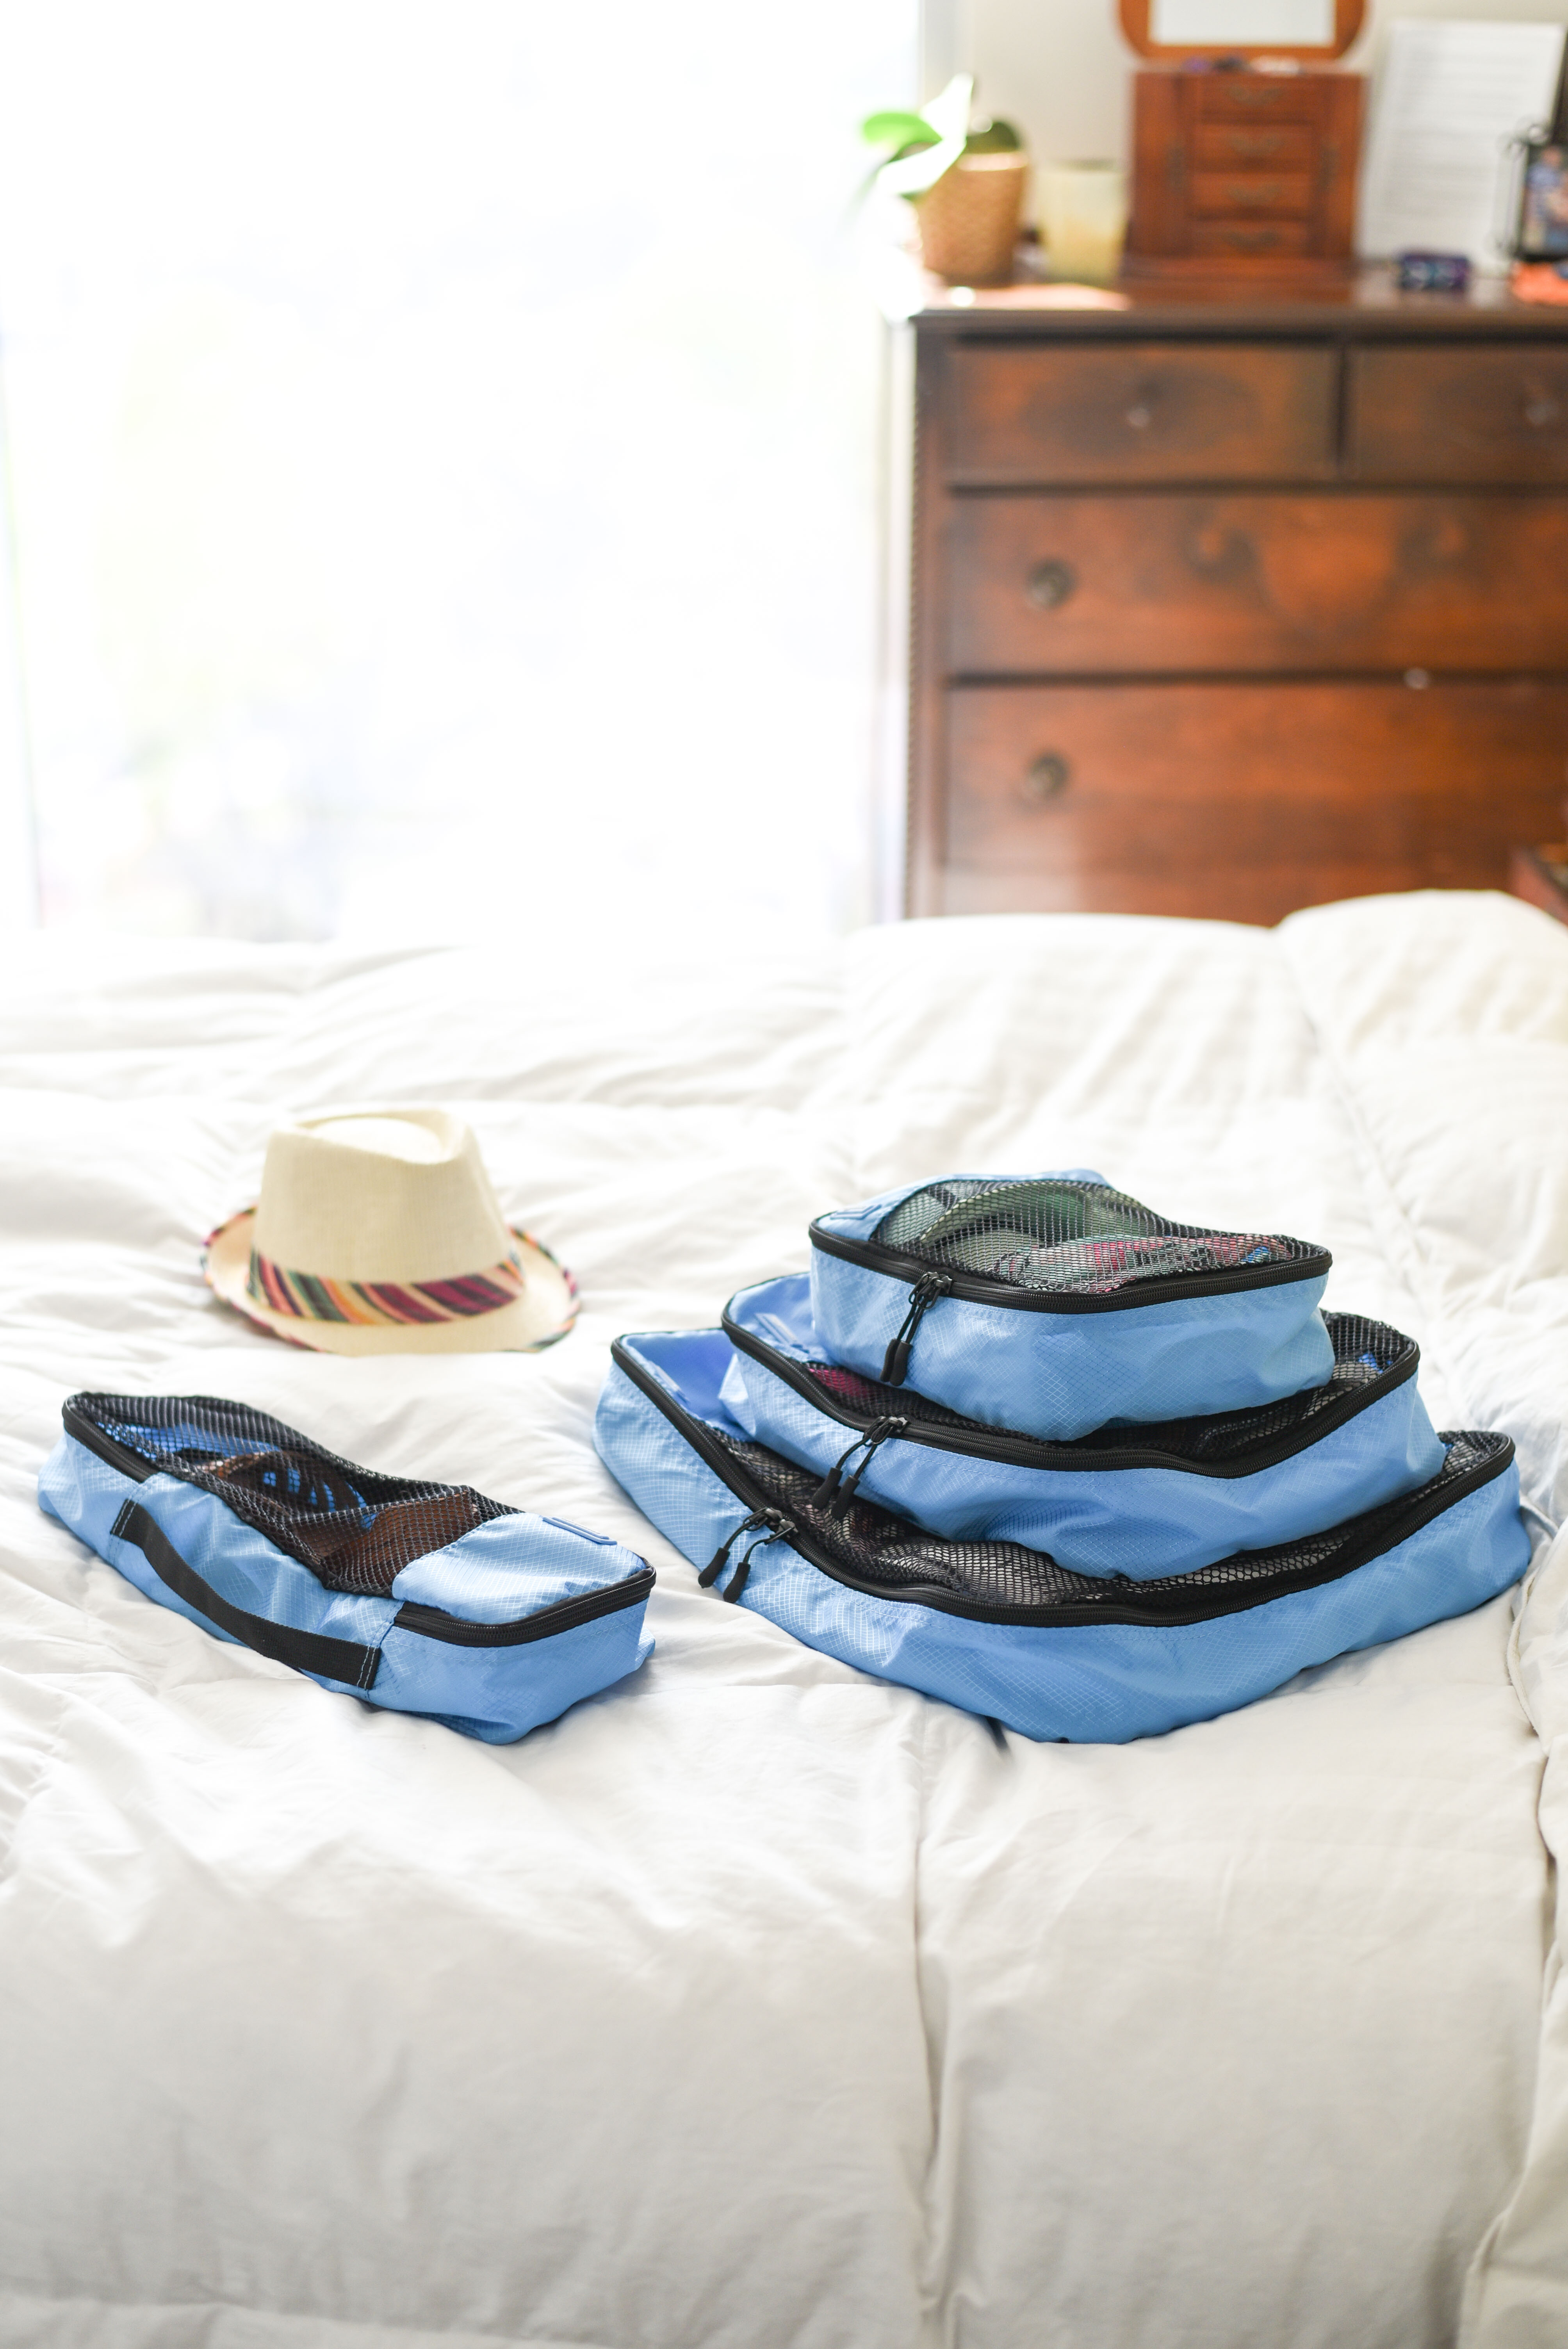 Packing cubes are my new favorite travel accessory!